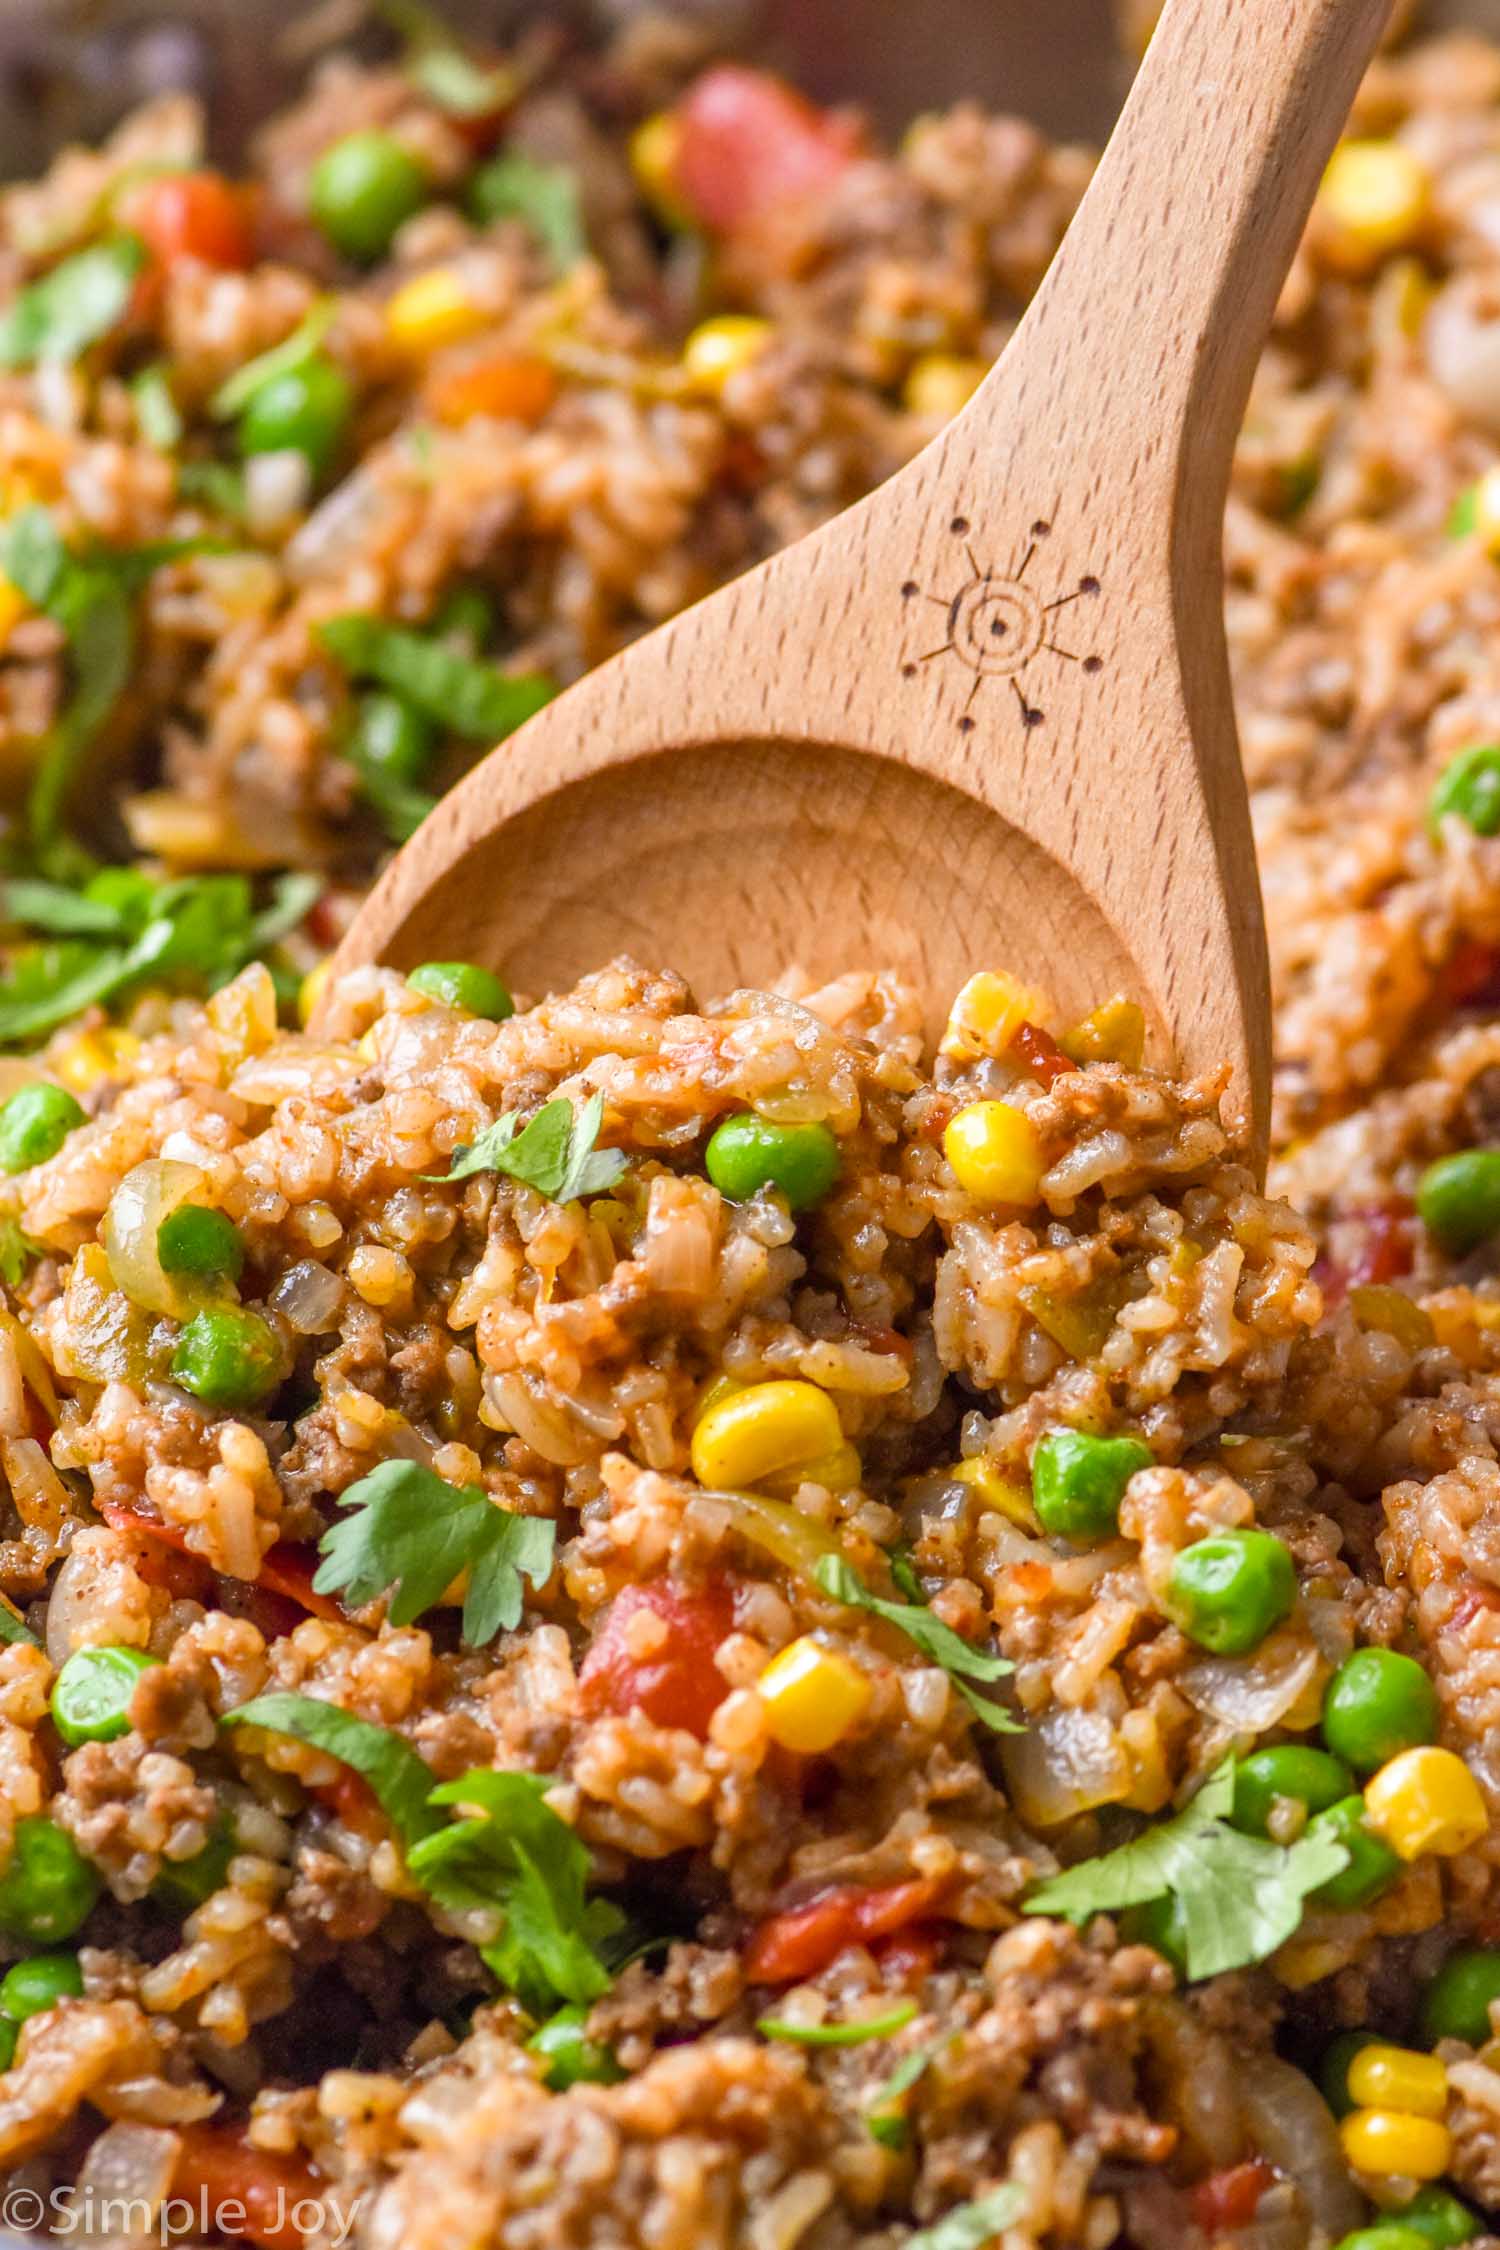 close up of large serving Spoon, serving up Ground Beef and Rice